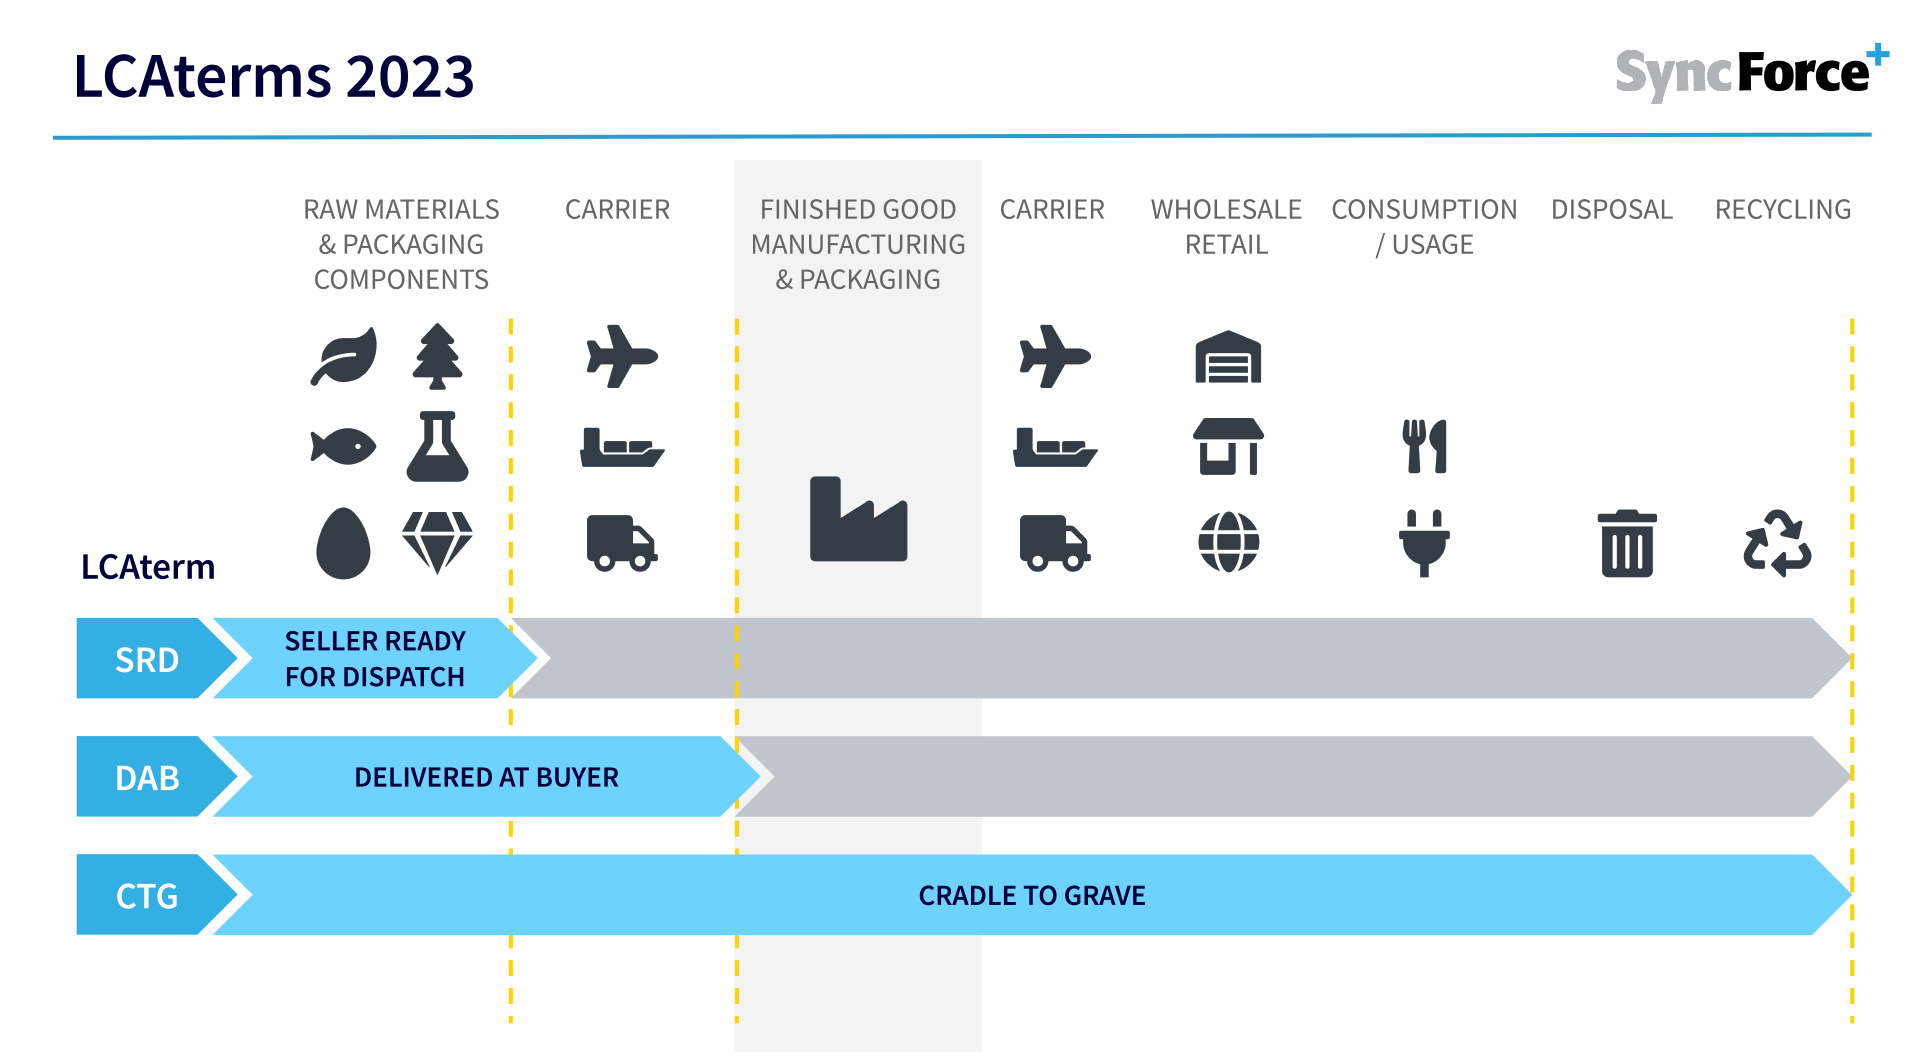 Visual overview of the supply chain and the various LCAterms